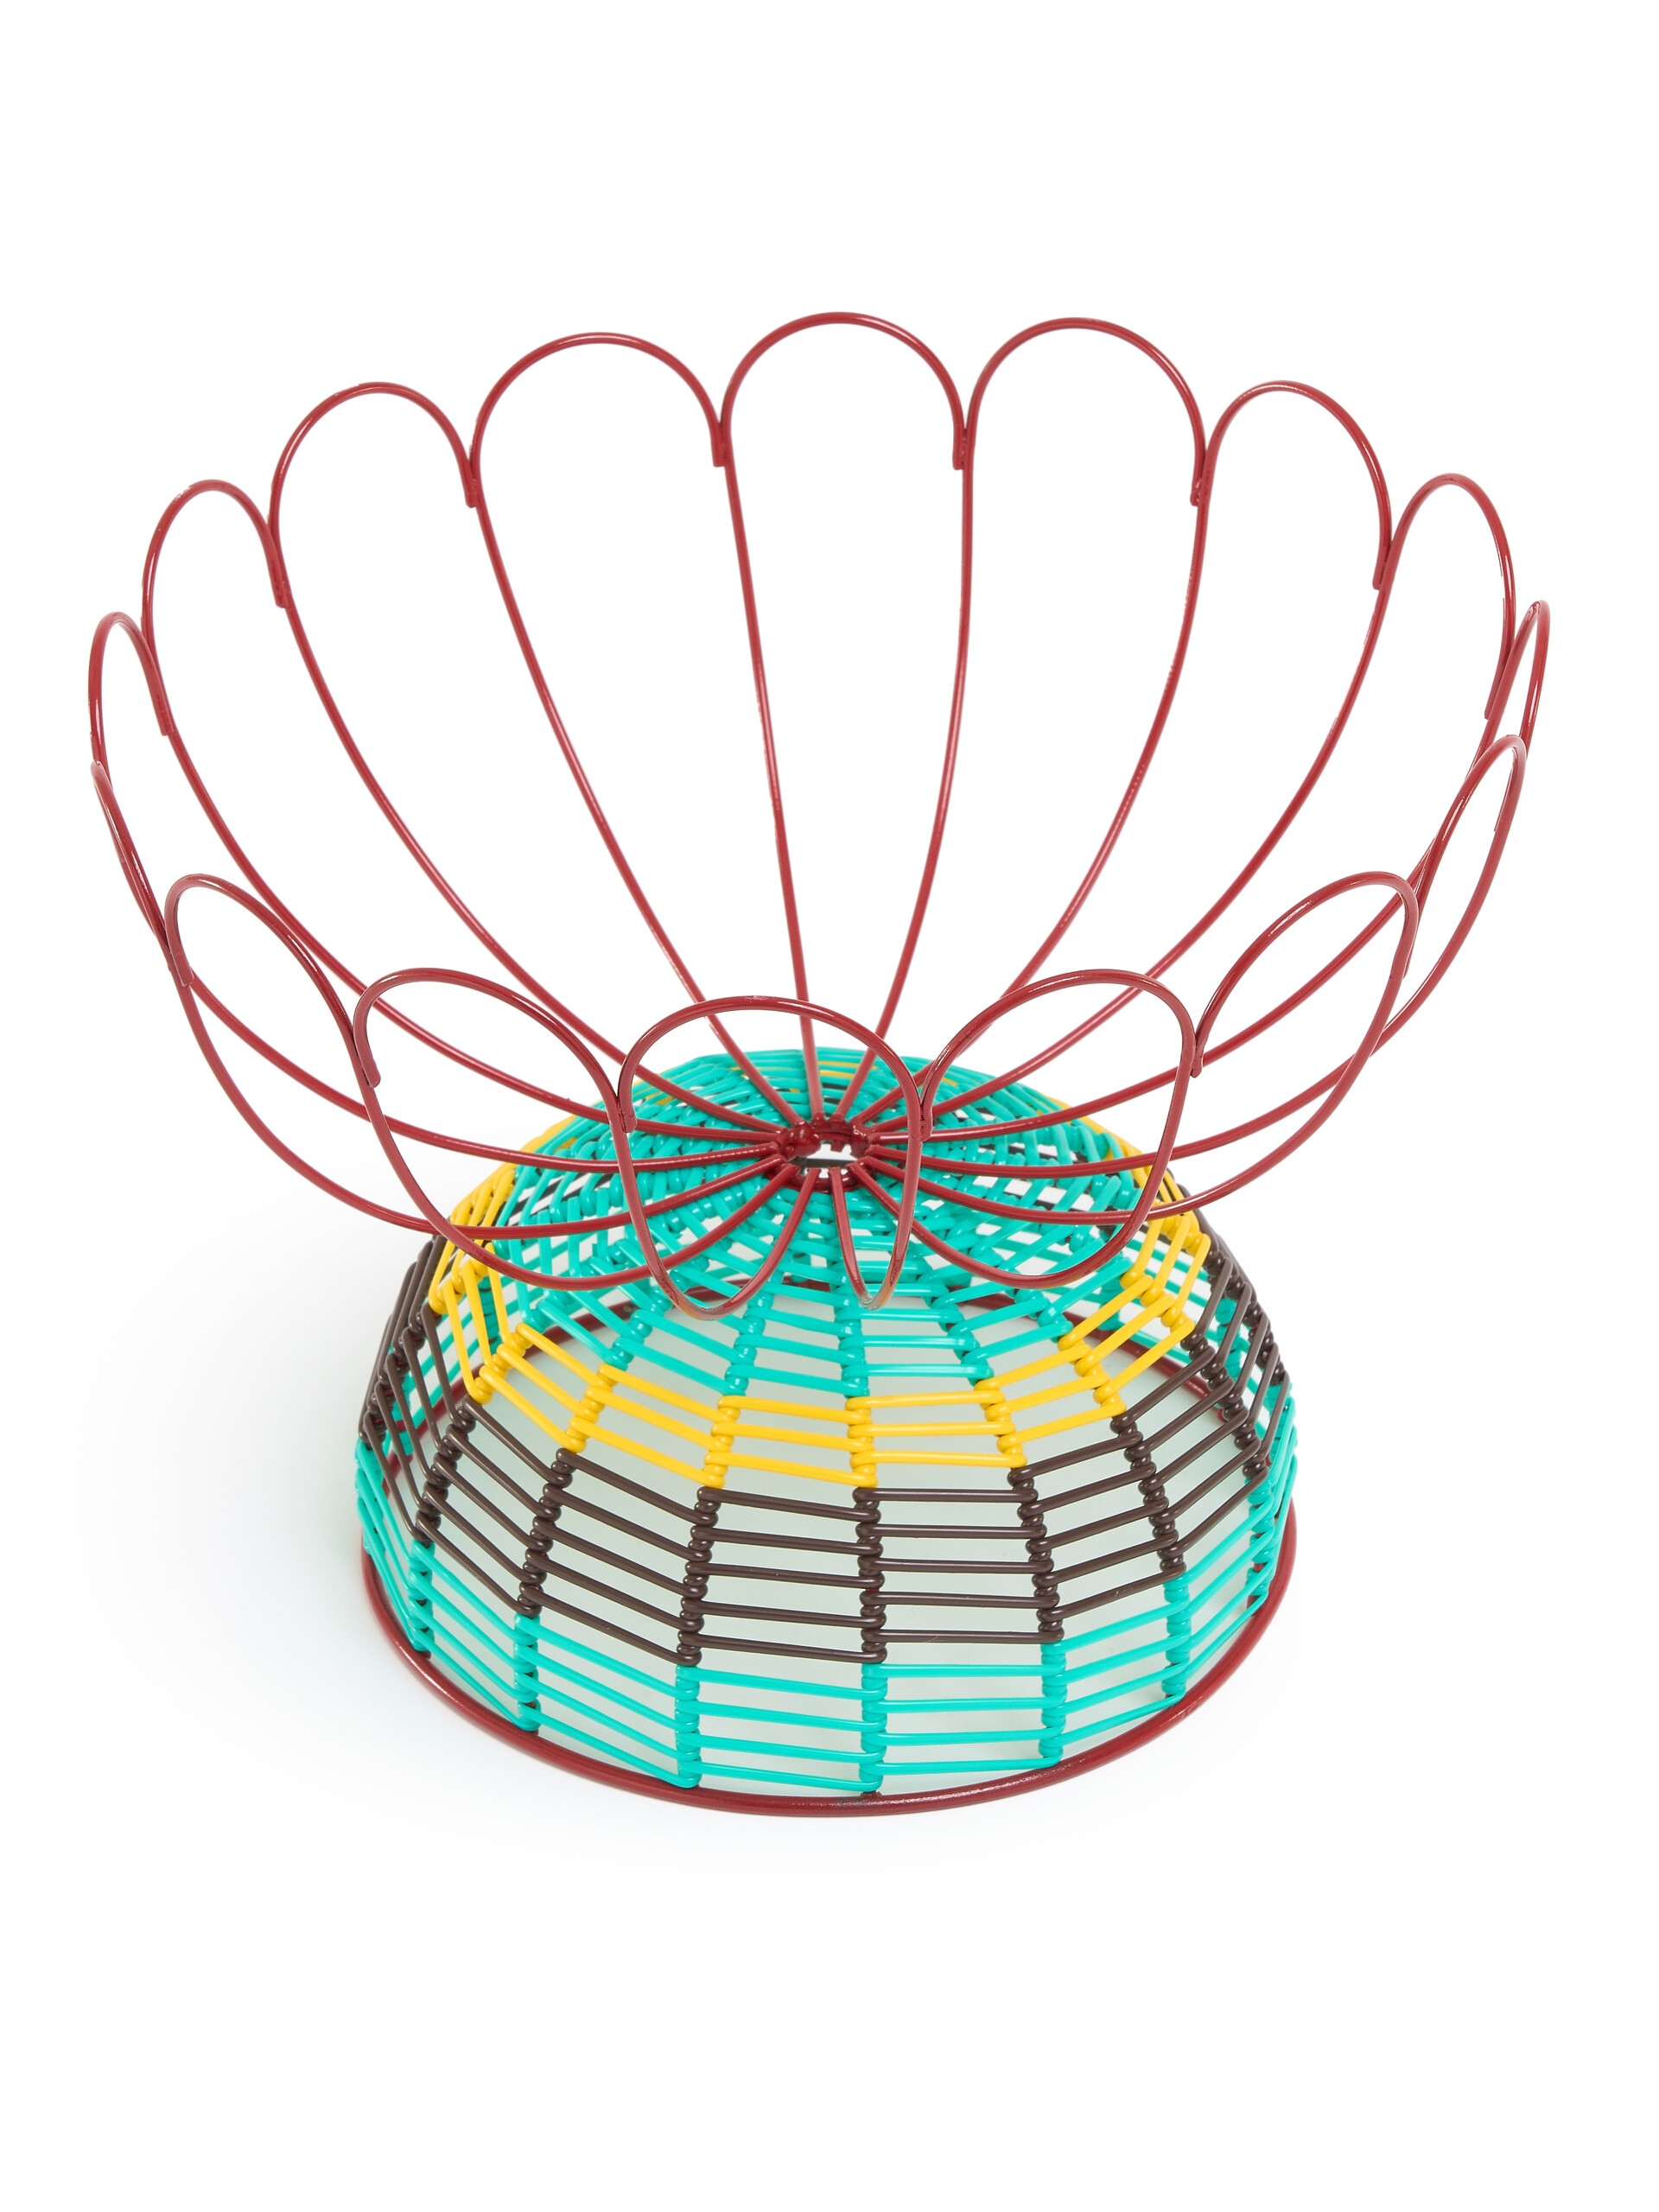 Turquoise Marni Market Wire Fruit Basket - Accessories - Image 3